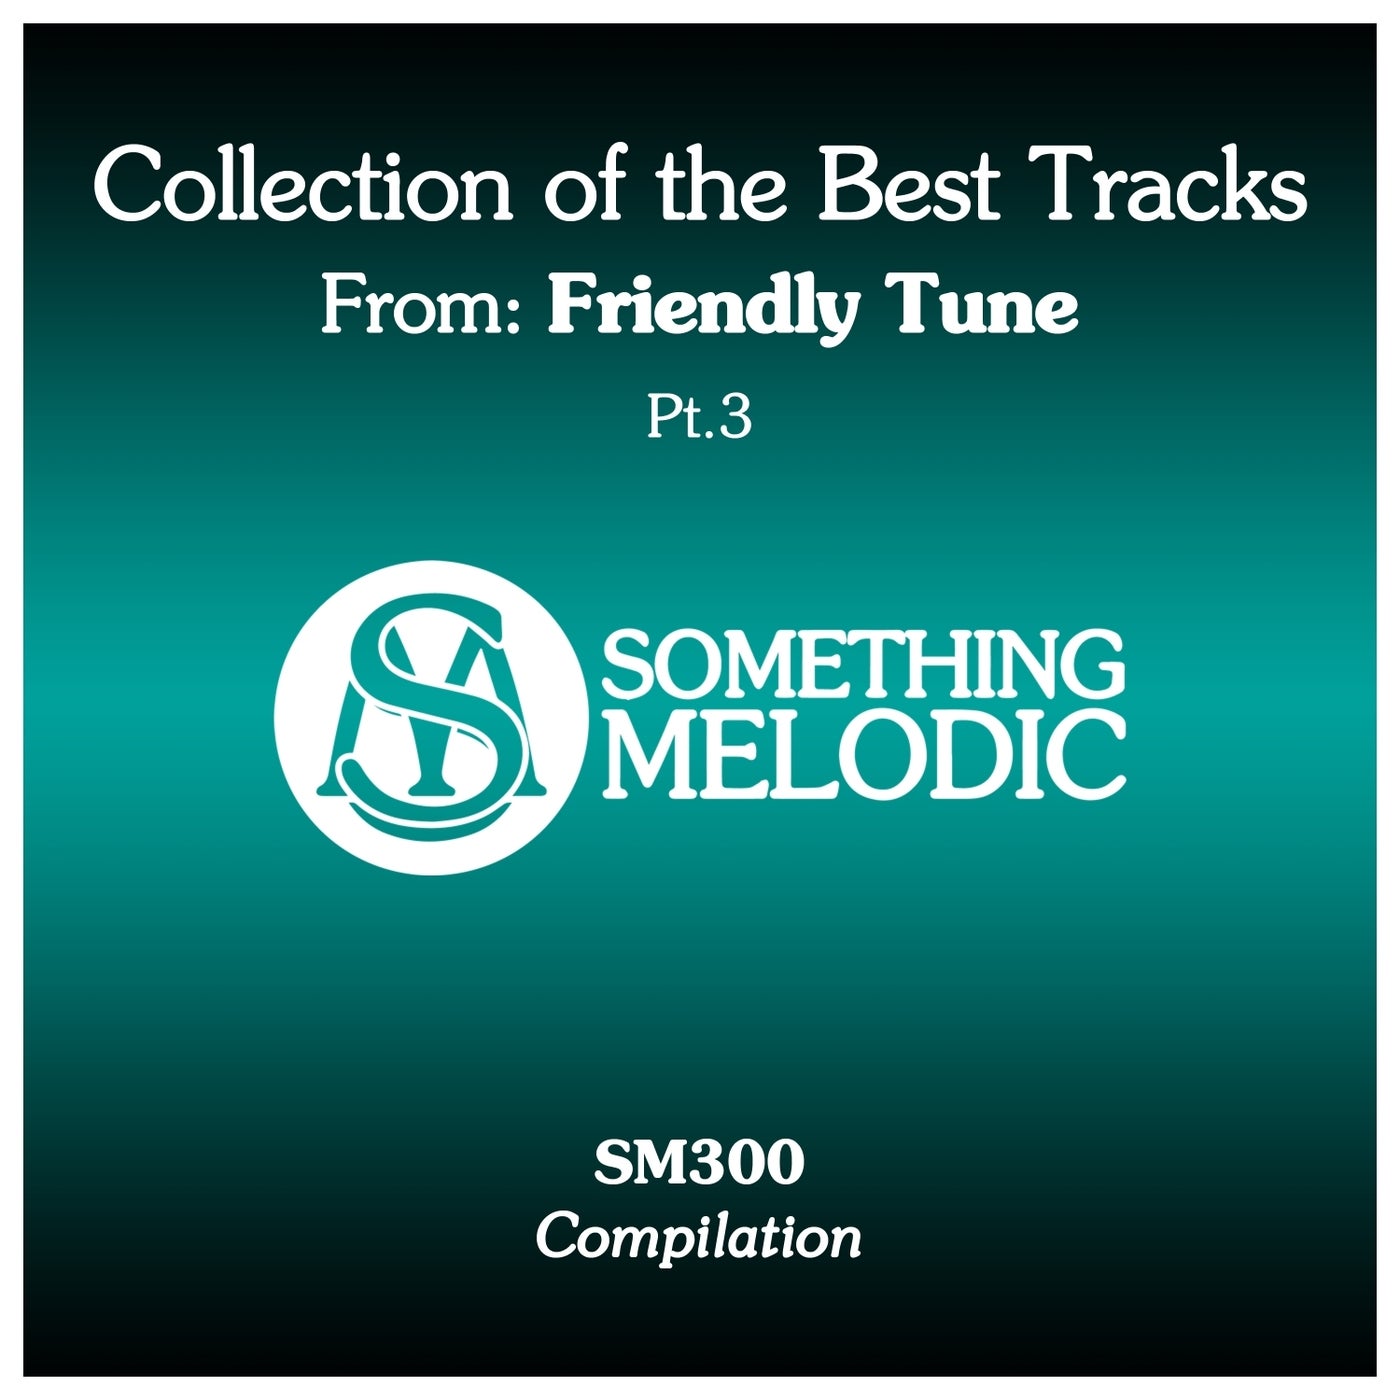 Friendly Tune – Collection of the Best Tracks From: Friendly Tune, Pt. 3 [SM300]